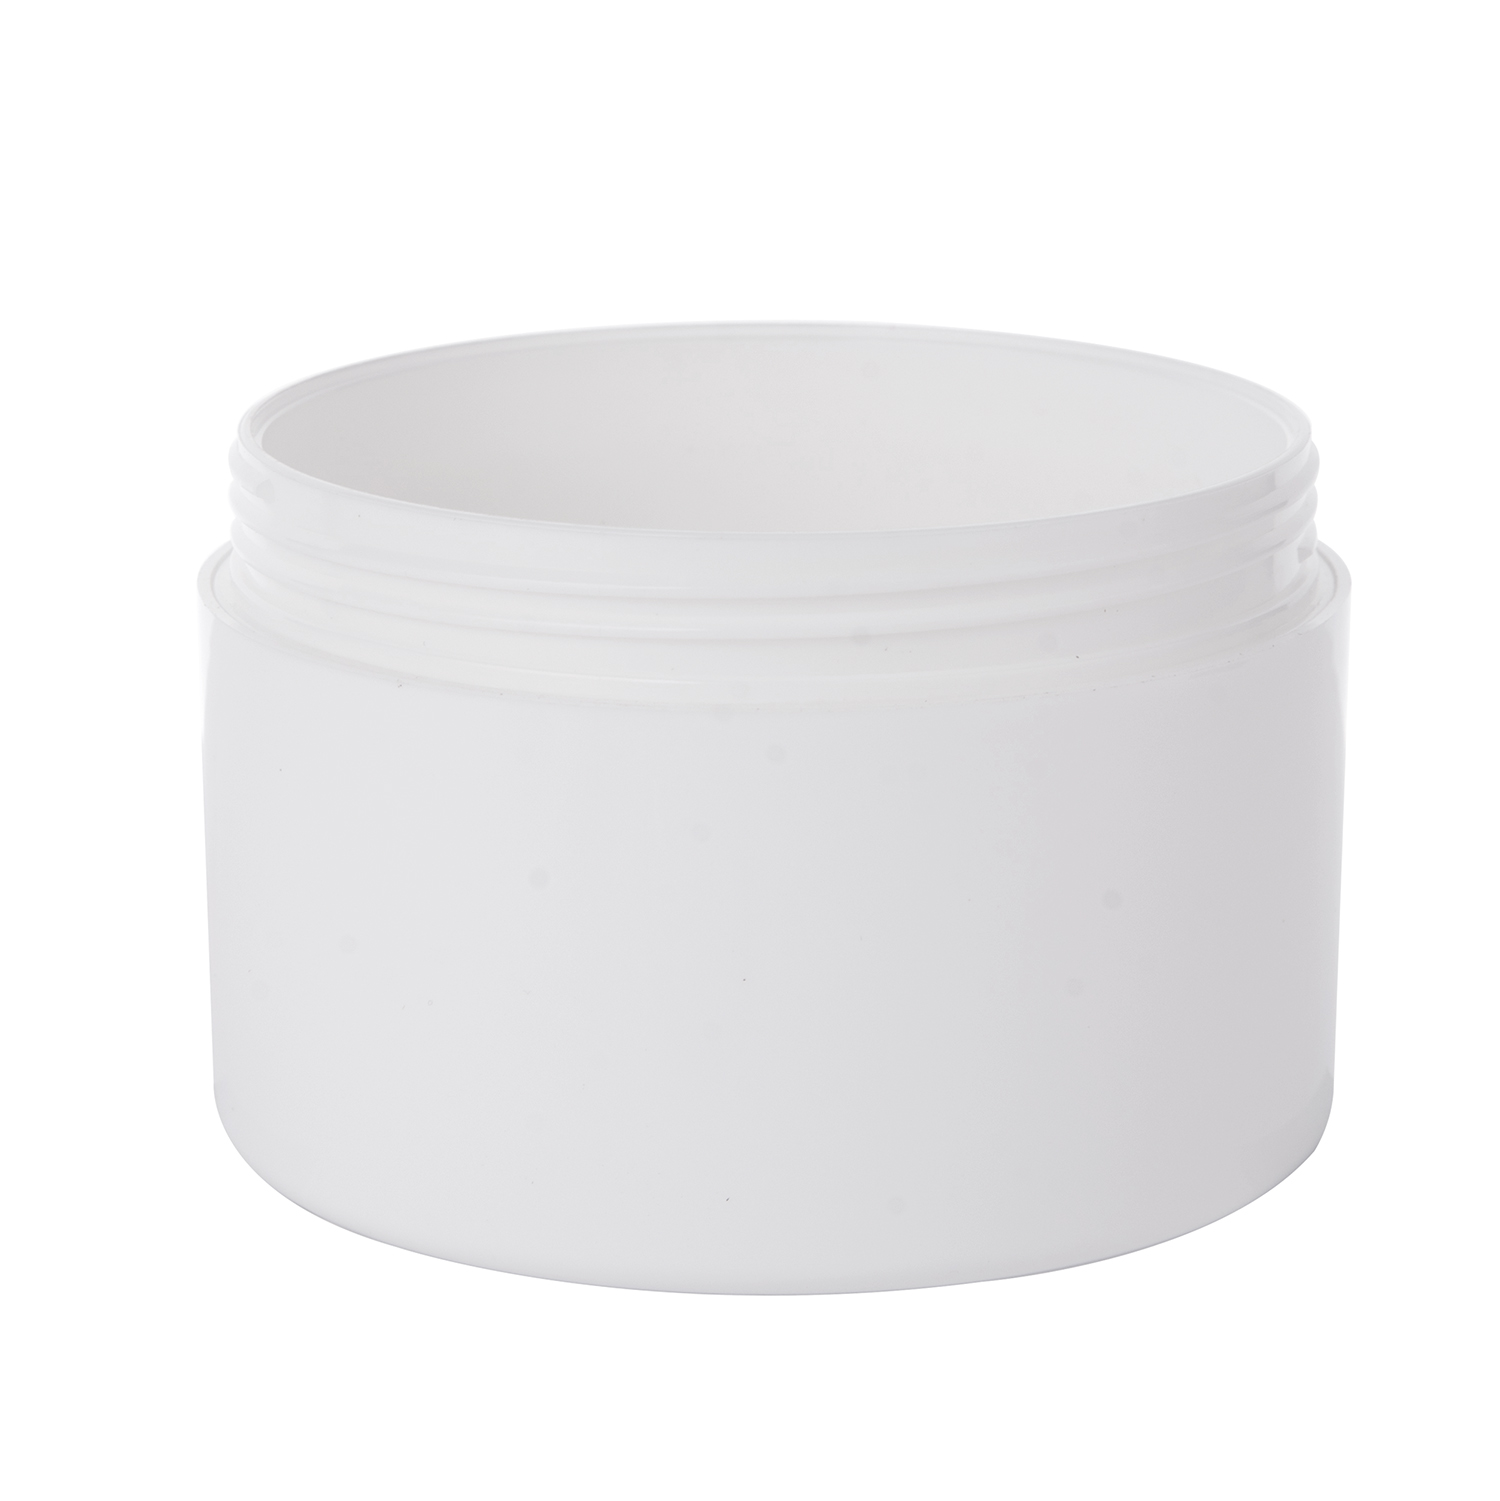 Recycleable PP（30%—100%PCR） Cosmetic Jar High Quality Round Cosmetic Packaging Wholesale PCR Cosmetic Jar